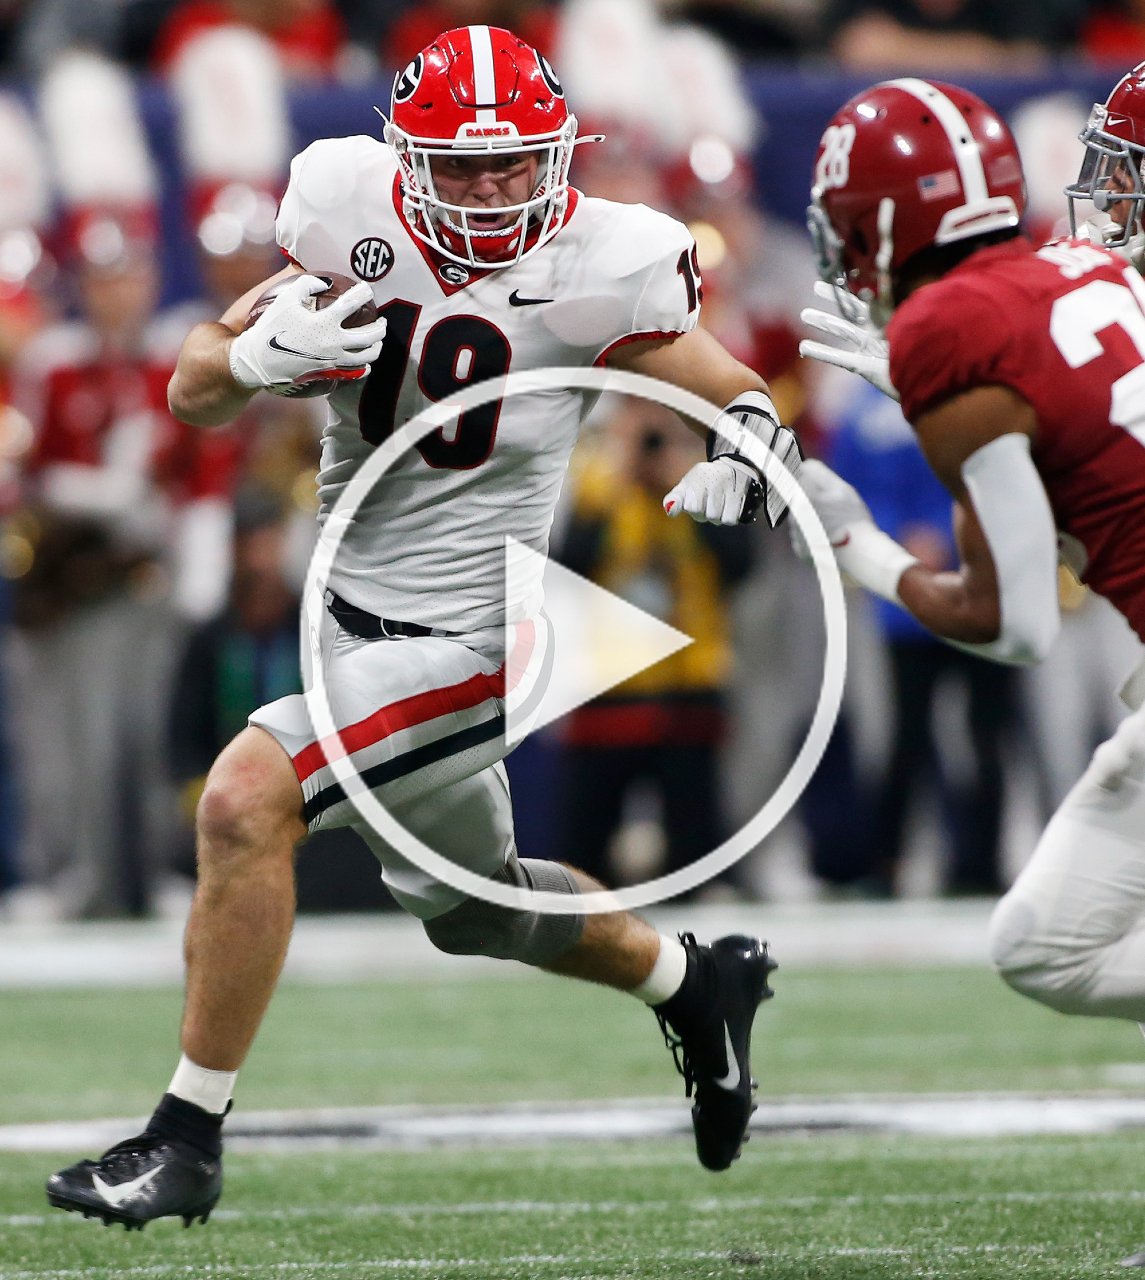 White uniforms, Mark Richt Hall of Fame, which Bulldogs should be All-SEC and Jack Bauerle's retirement